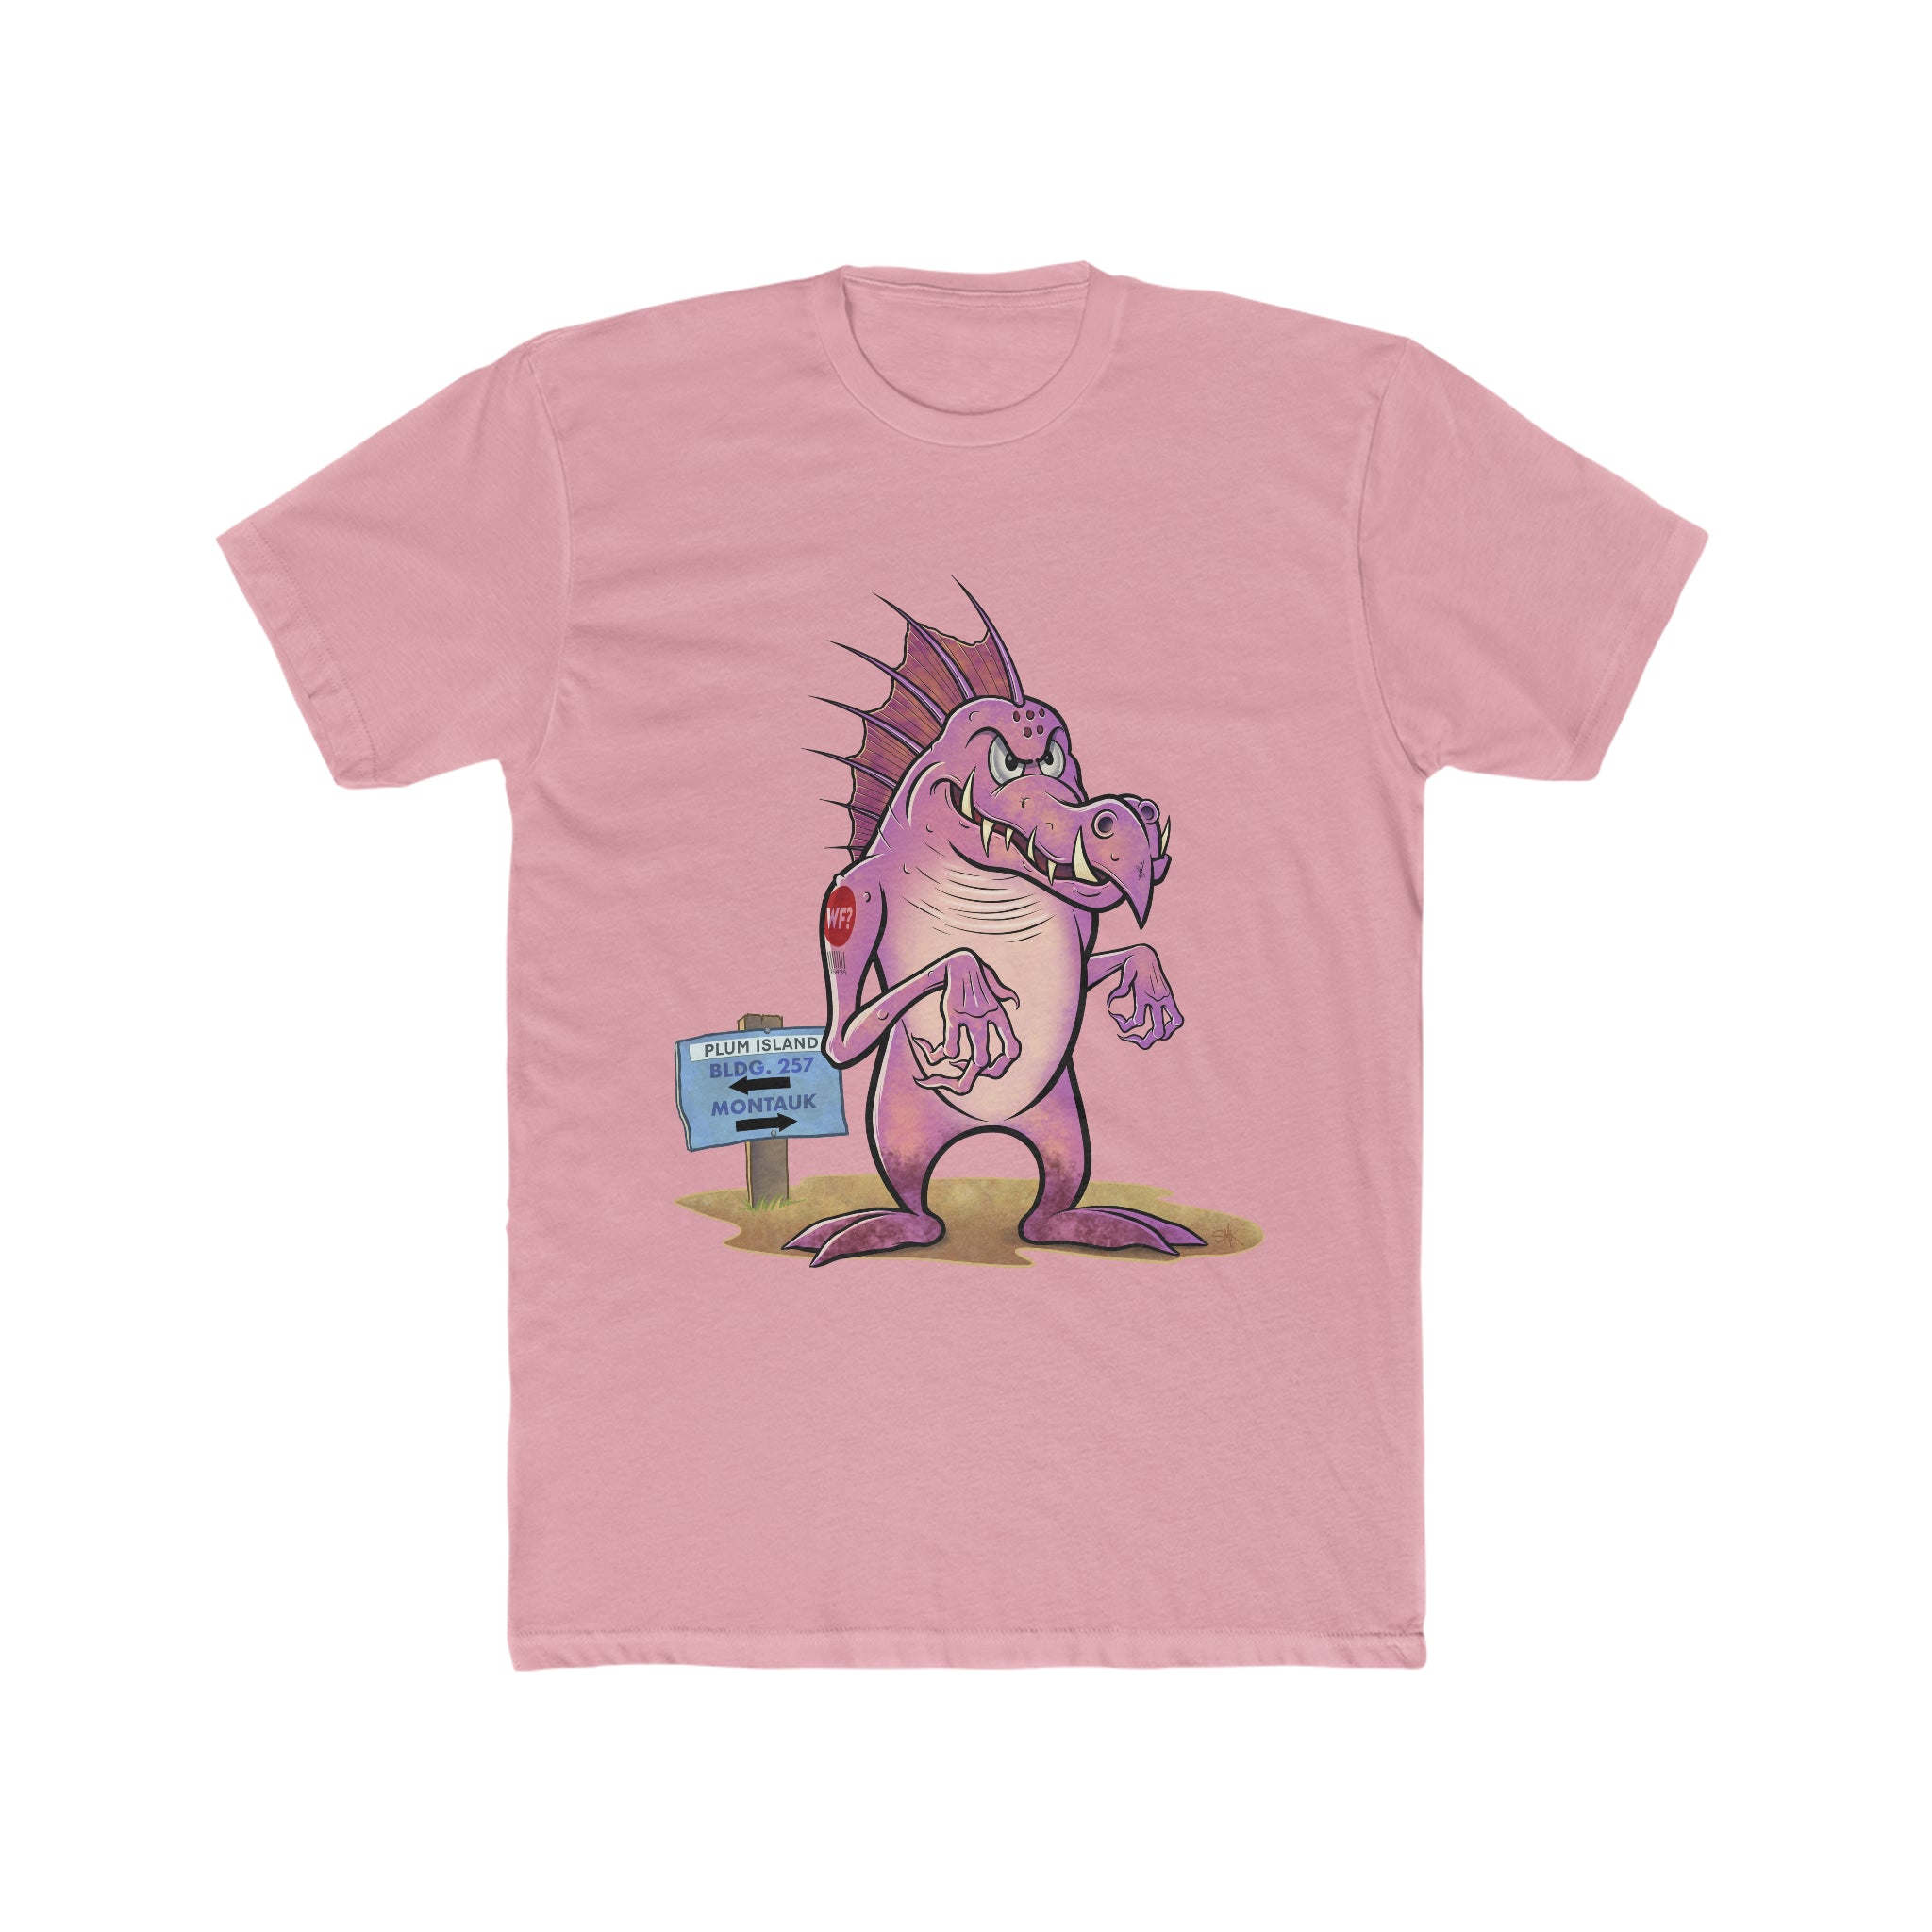 Buy solid-light-pink 9/28 Plum Island Limited T-Shirt